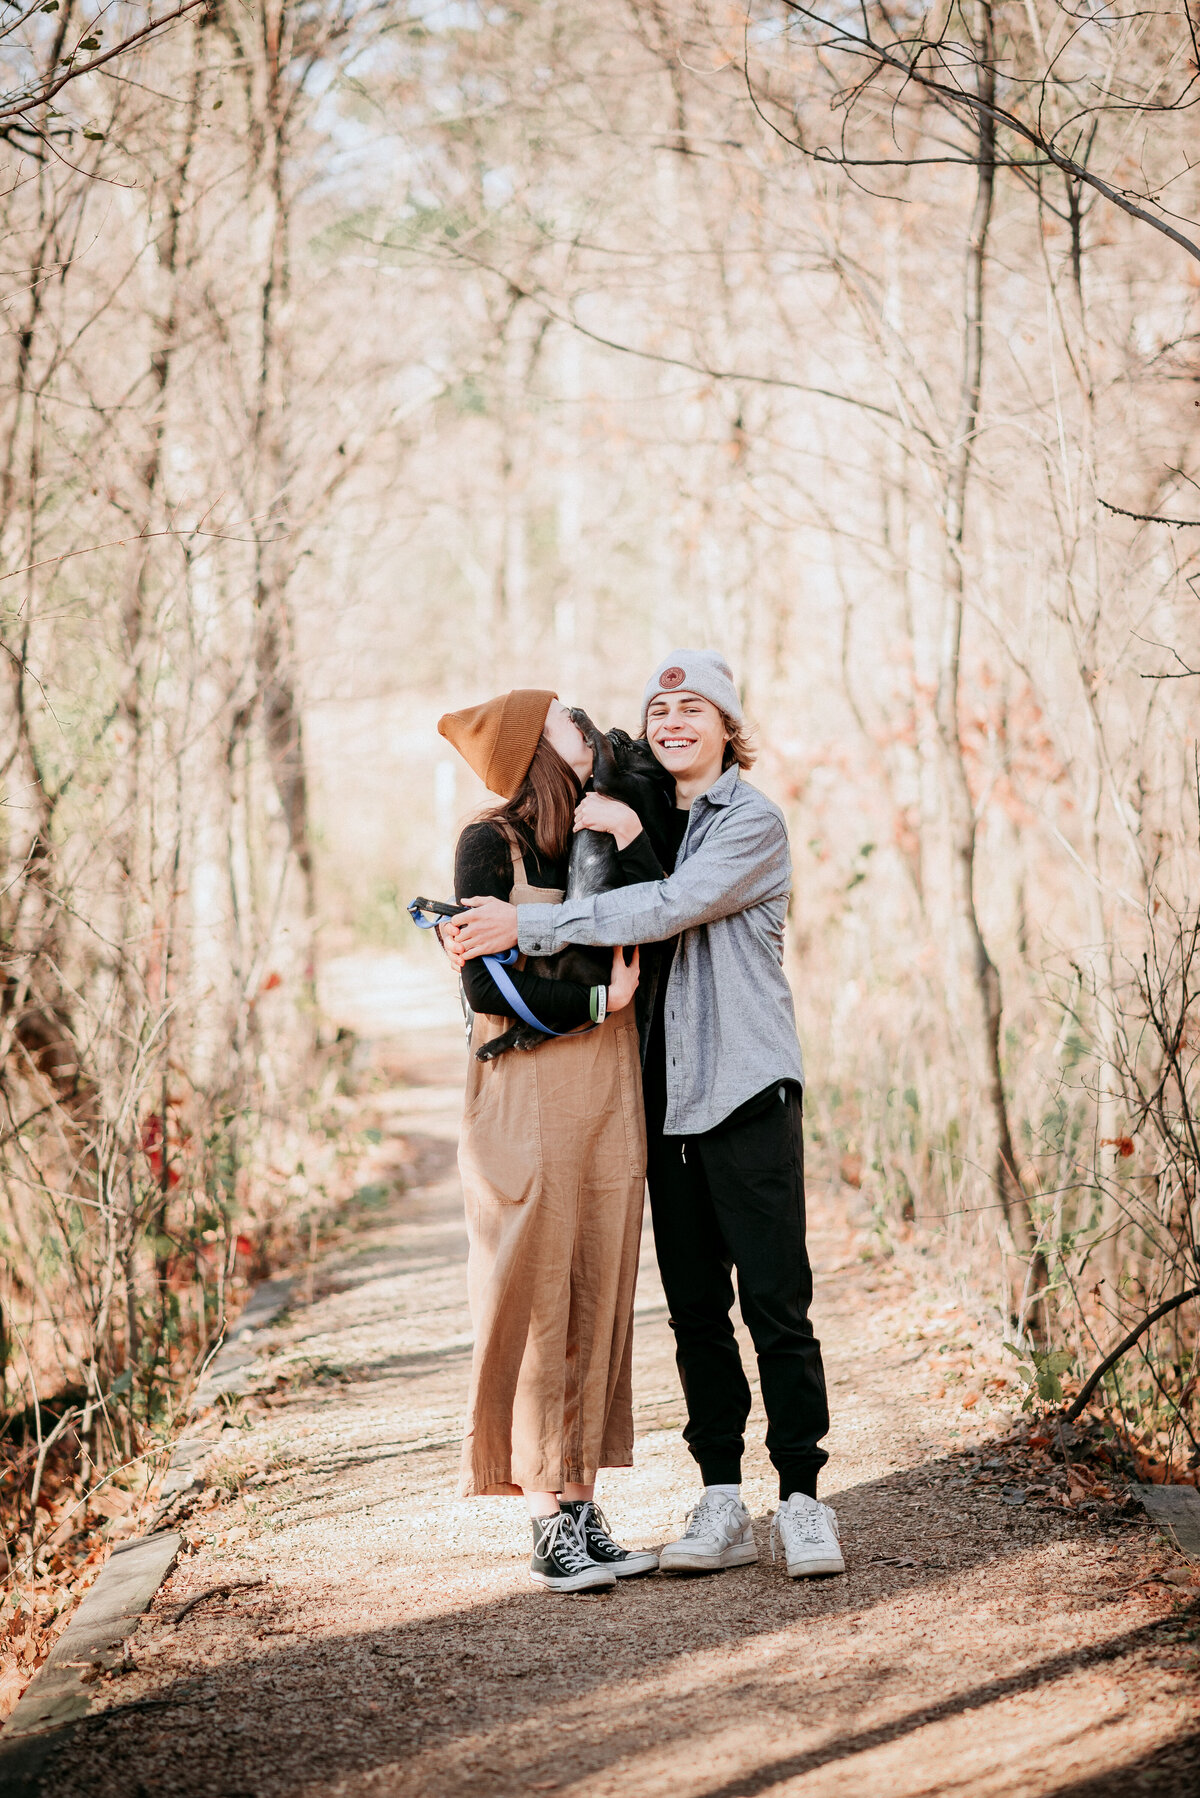 Hear woodland whispers in Minneapolis family photography. Shannon Kathleen Photography transforms outdoor scenes into enchanting family tales. Book your session now!